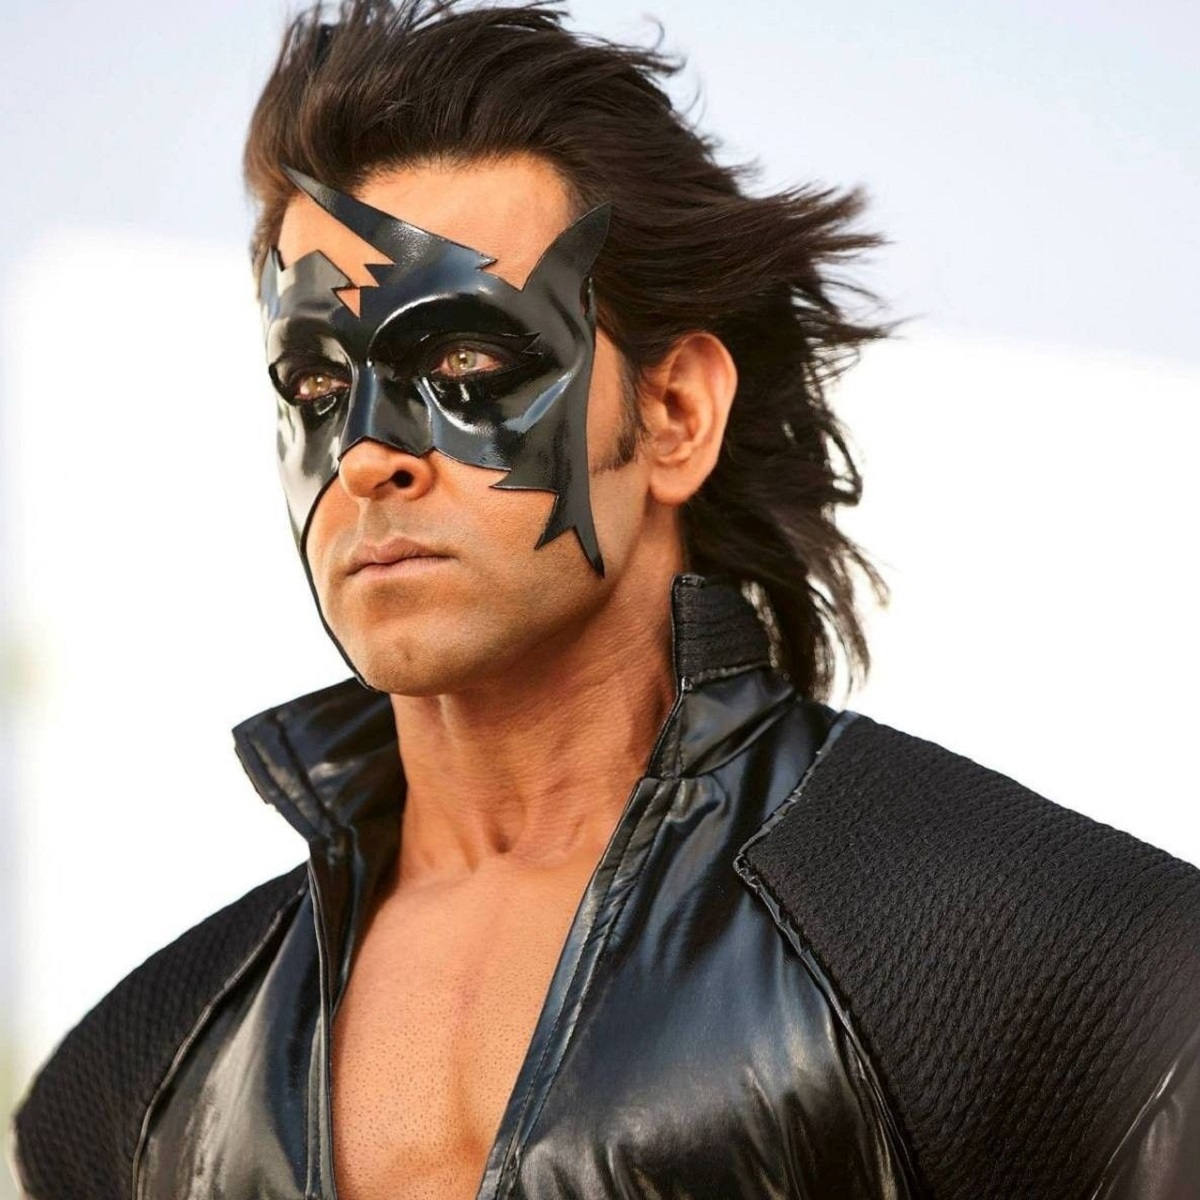 EXCLUSIVE: Hrithik Roshan to explore Time Travel in Krrish 4; Jadoo returns to the franchise after 2 decades